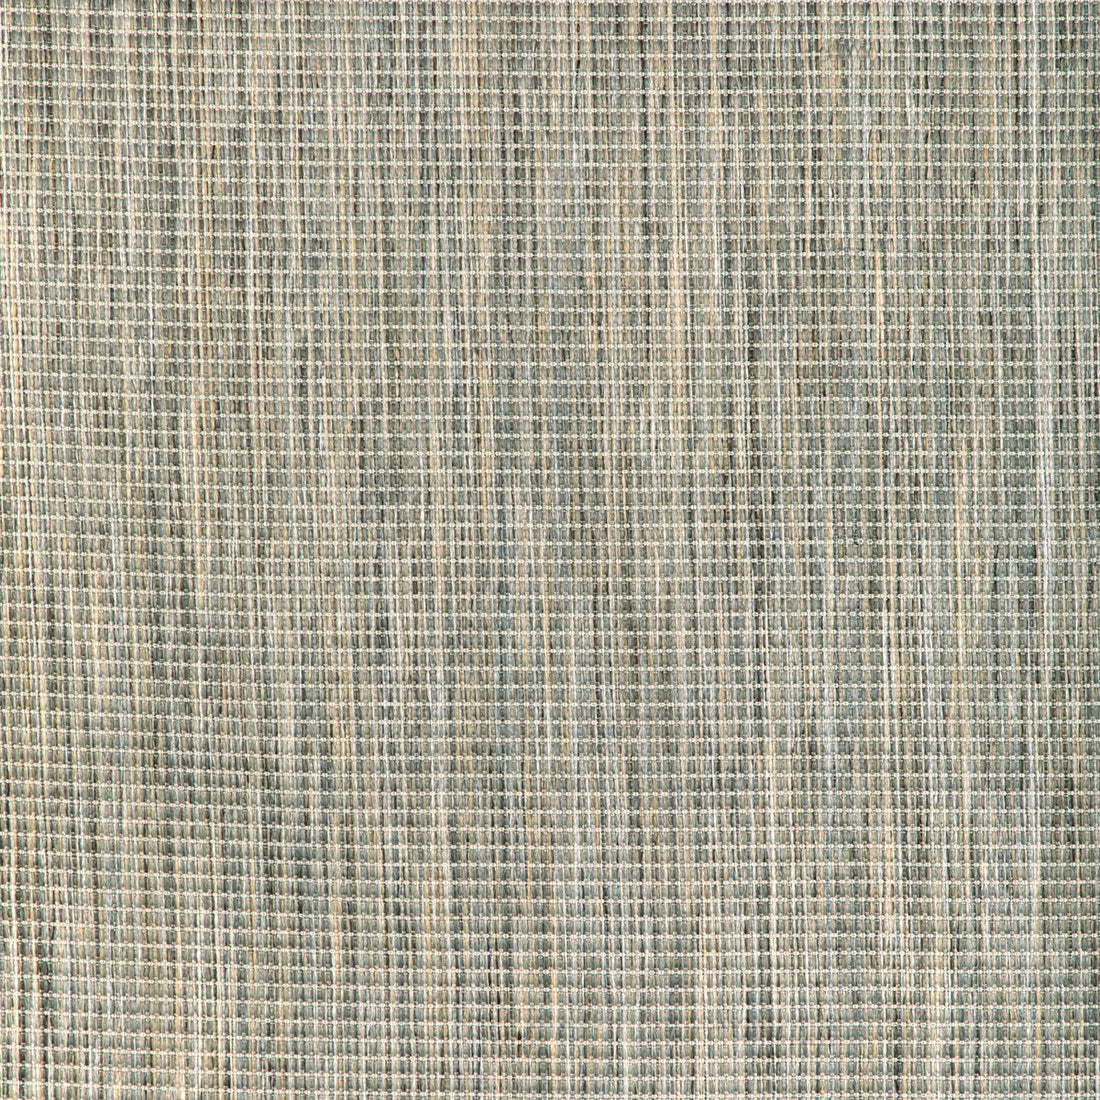 Kravet Smart fabric in 37014-1611 color - pattern 37014.1611.0 - by Kravet Smart in the Gis collection